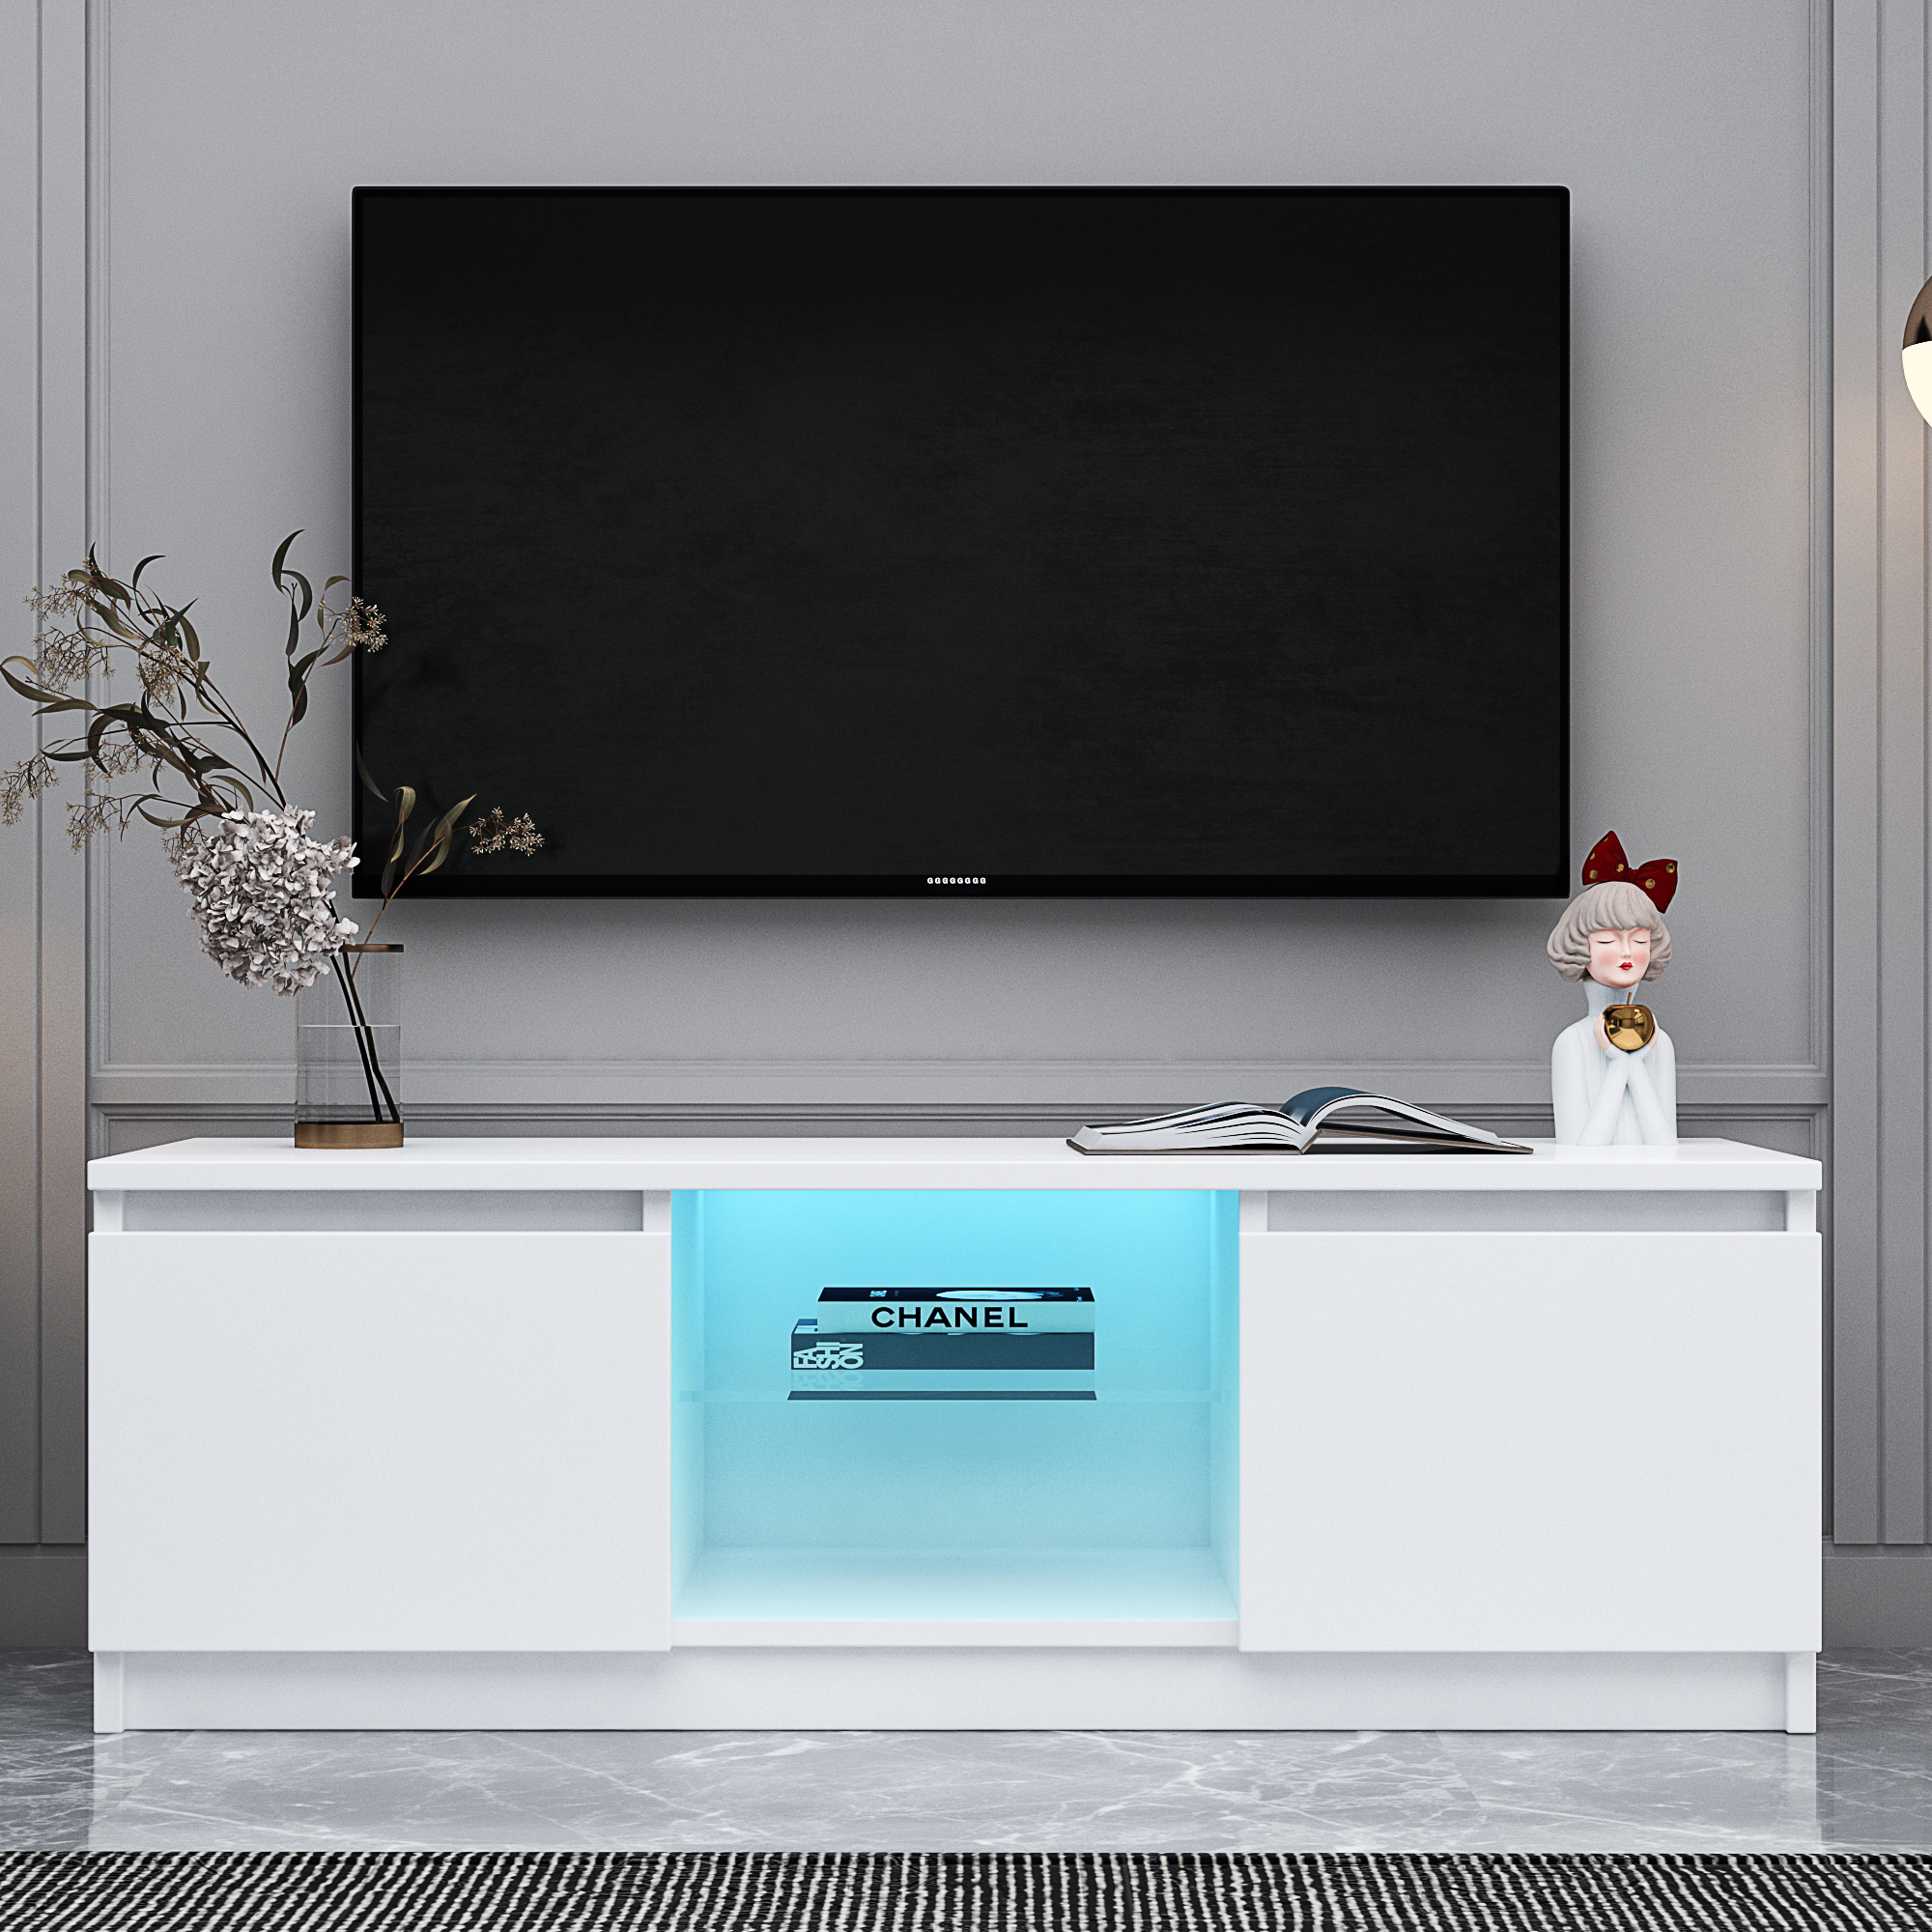 TV Cabinet Wholesale, White TV Stand with Lights, Modern LED TV Cabinet with Storage Drawers, Living Room Entertainment Center Media Console Table-CASAINC